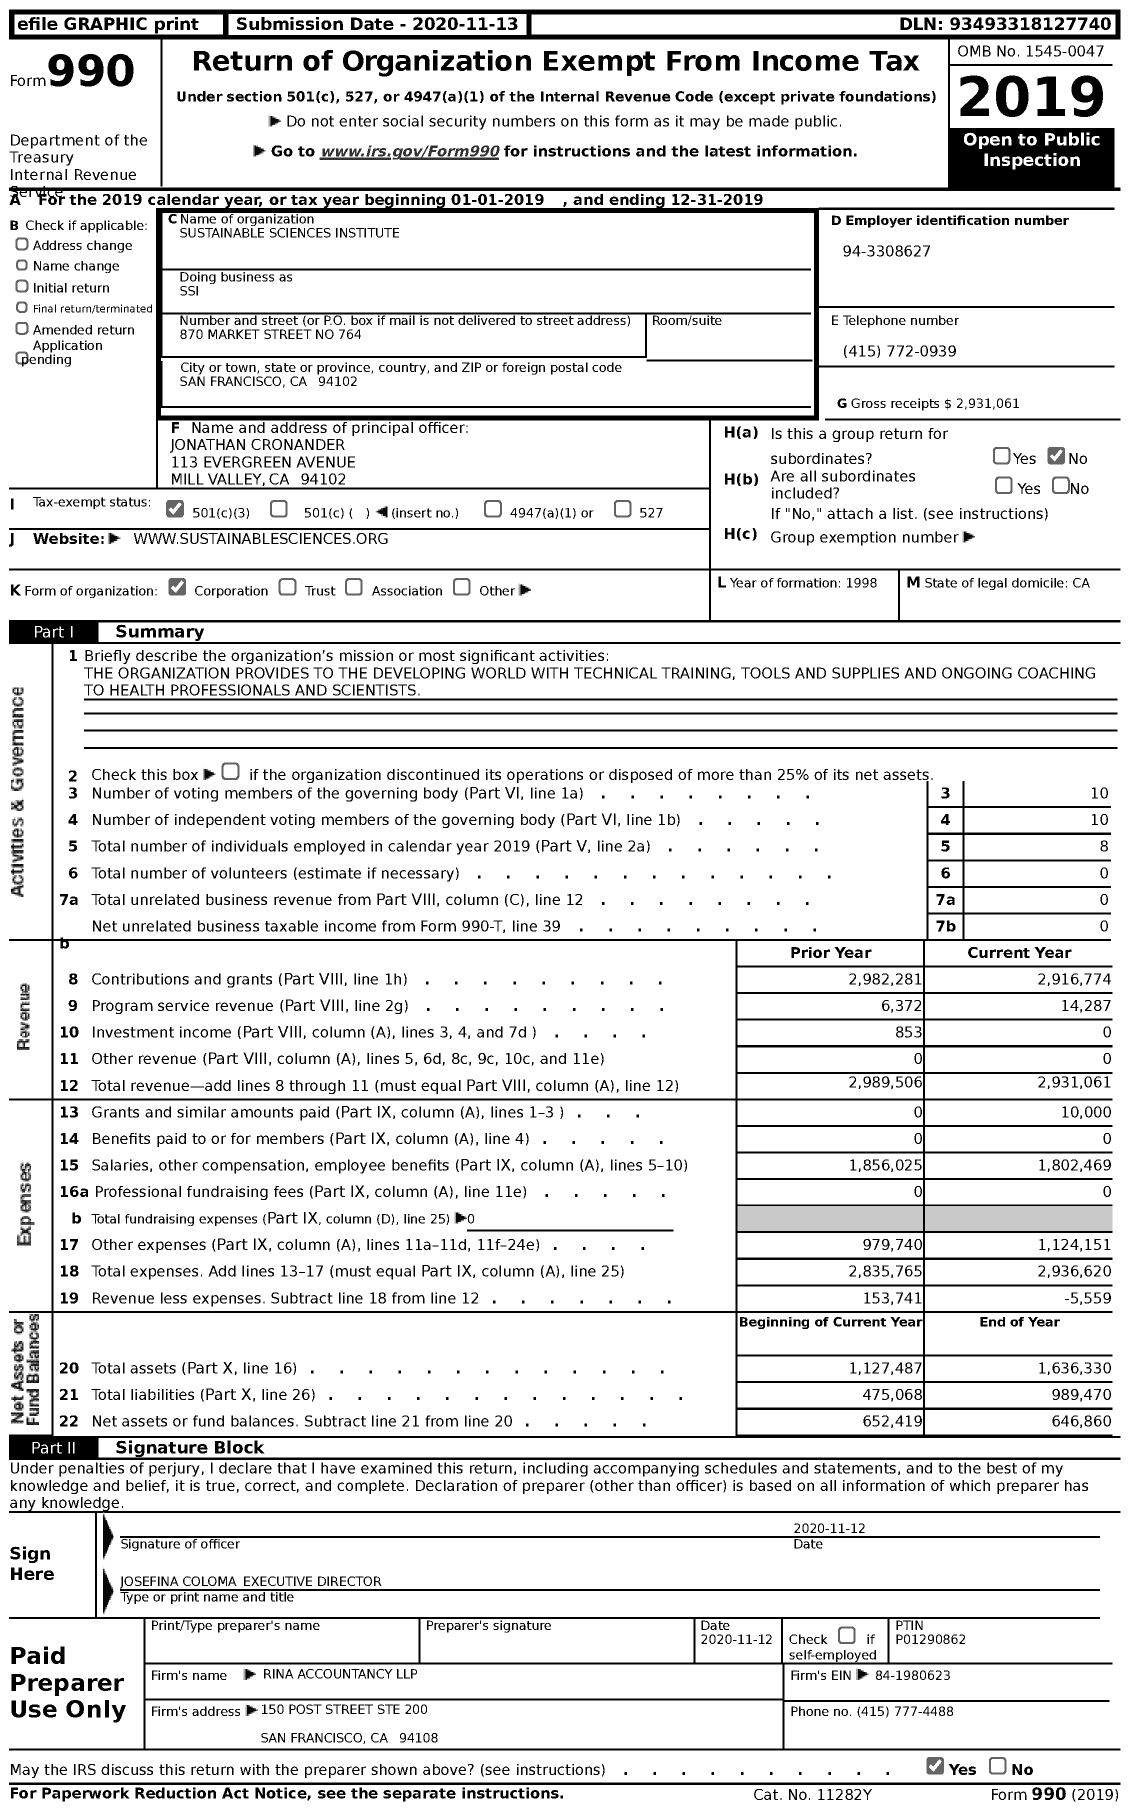 Image of first page of 2019 Form 990 for Sustainable Sciences Institute (SSI)